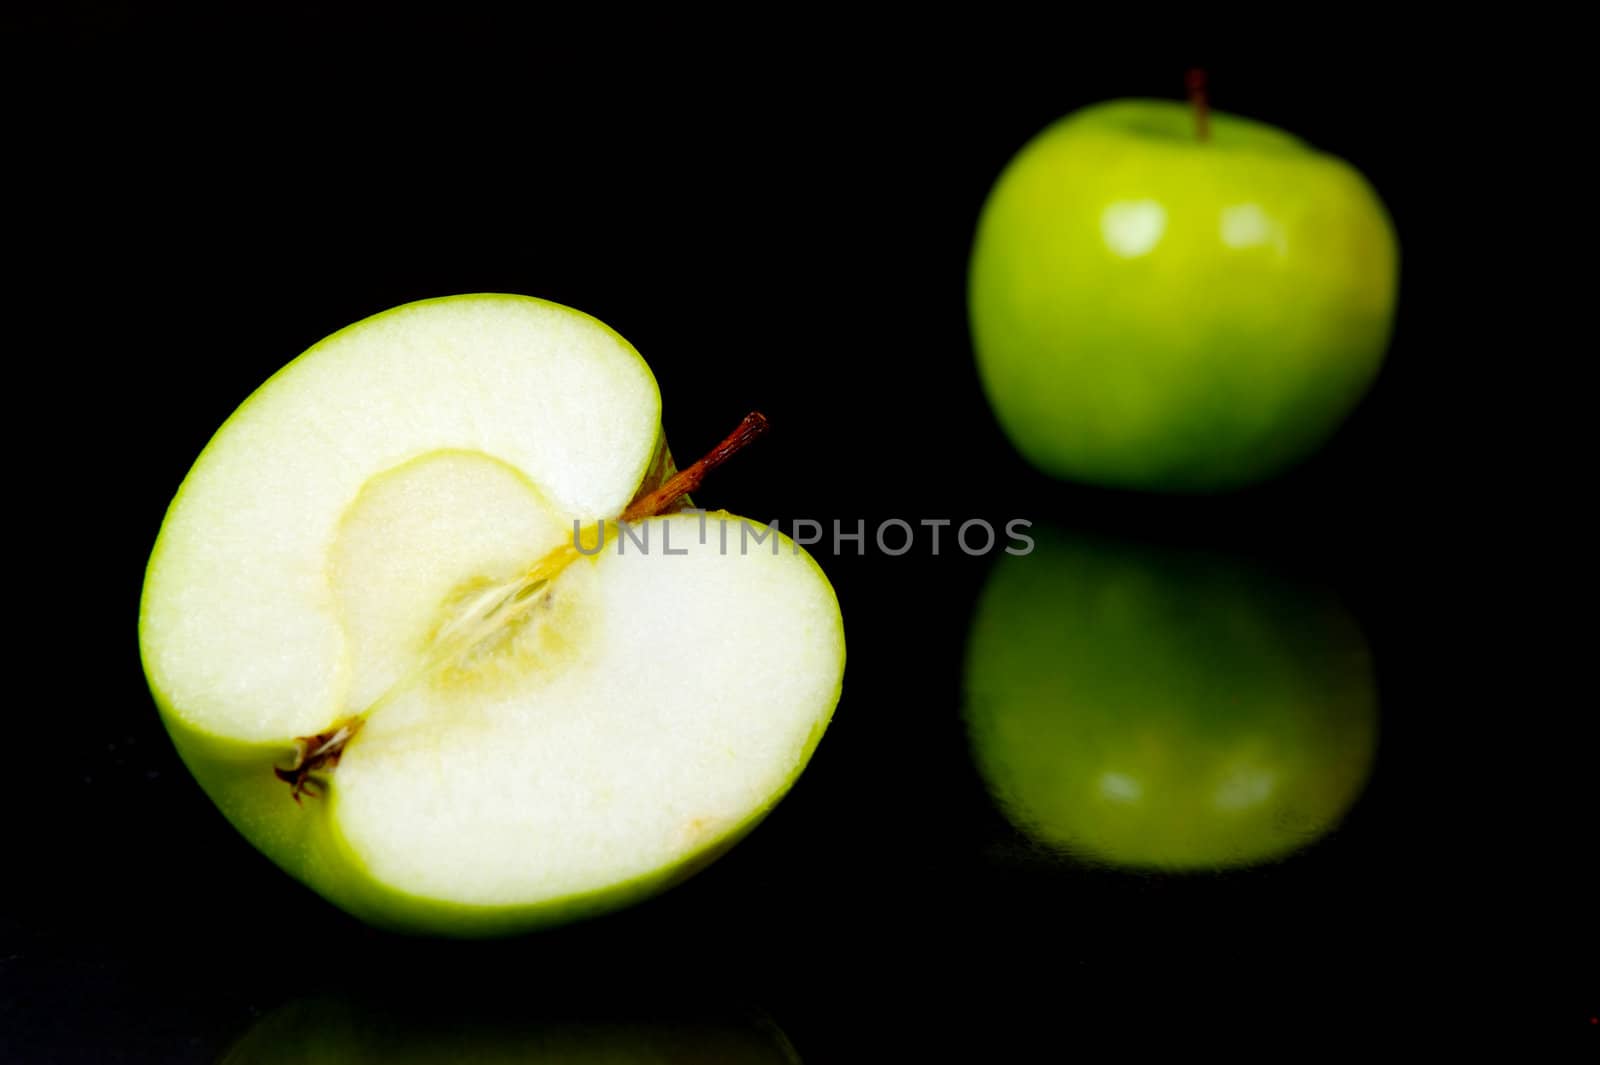 Red & Green Apples by Kitch